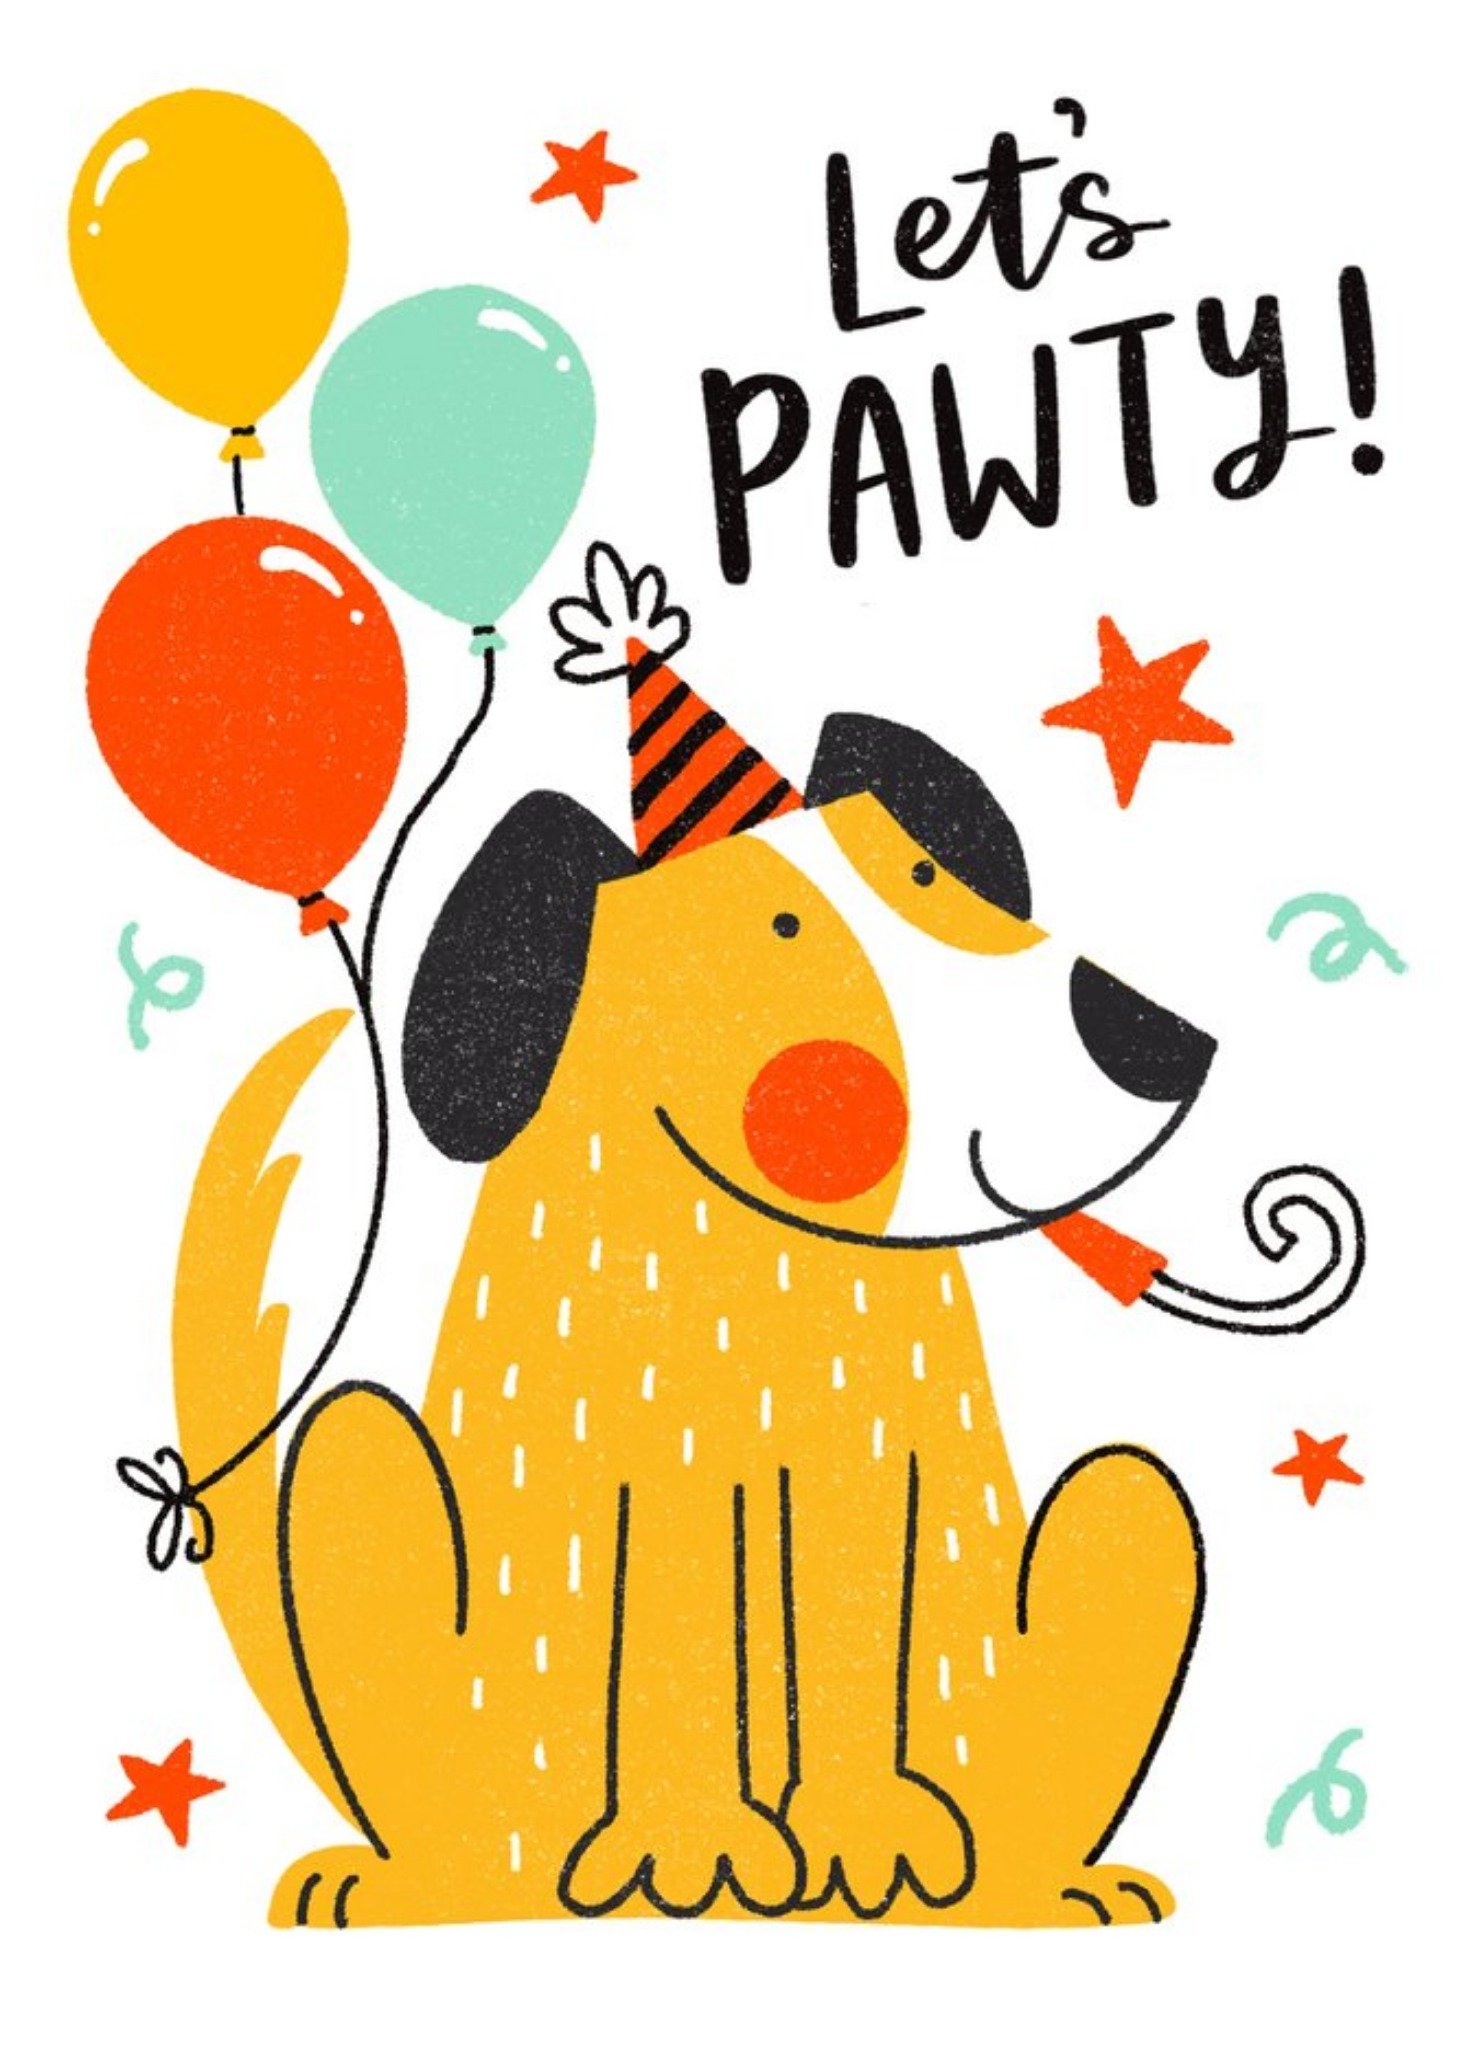 Moonpig Bright Illustration Of A Party Dog. Let's Pawty Card, Large